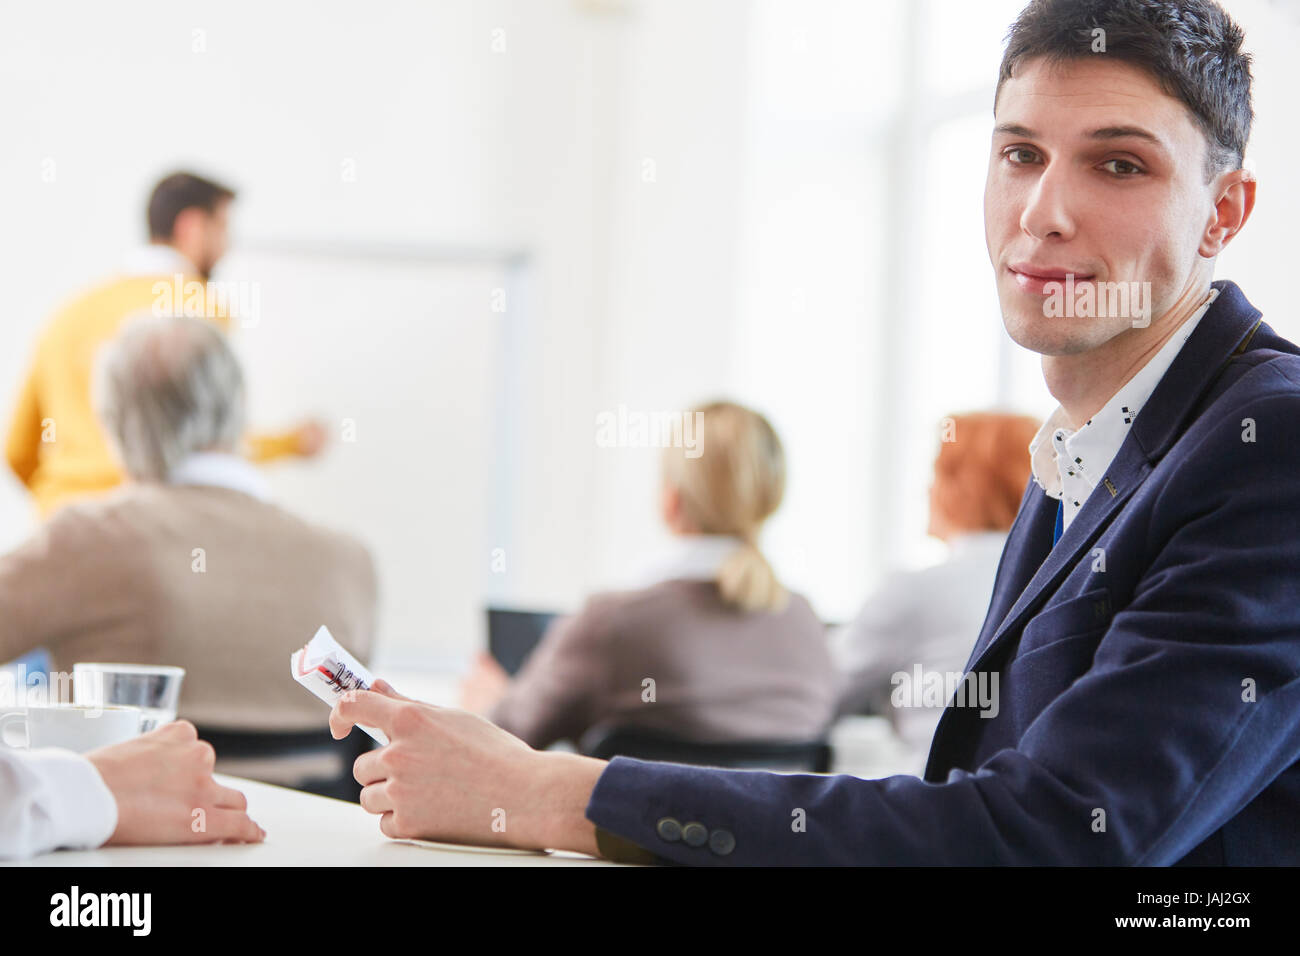 Young man as businessman or student or business trainee Stock Photo